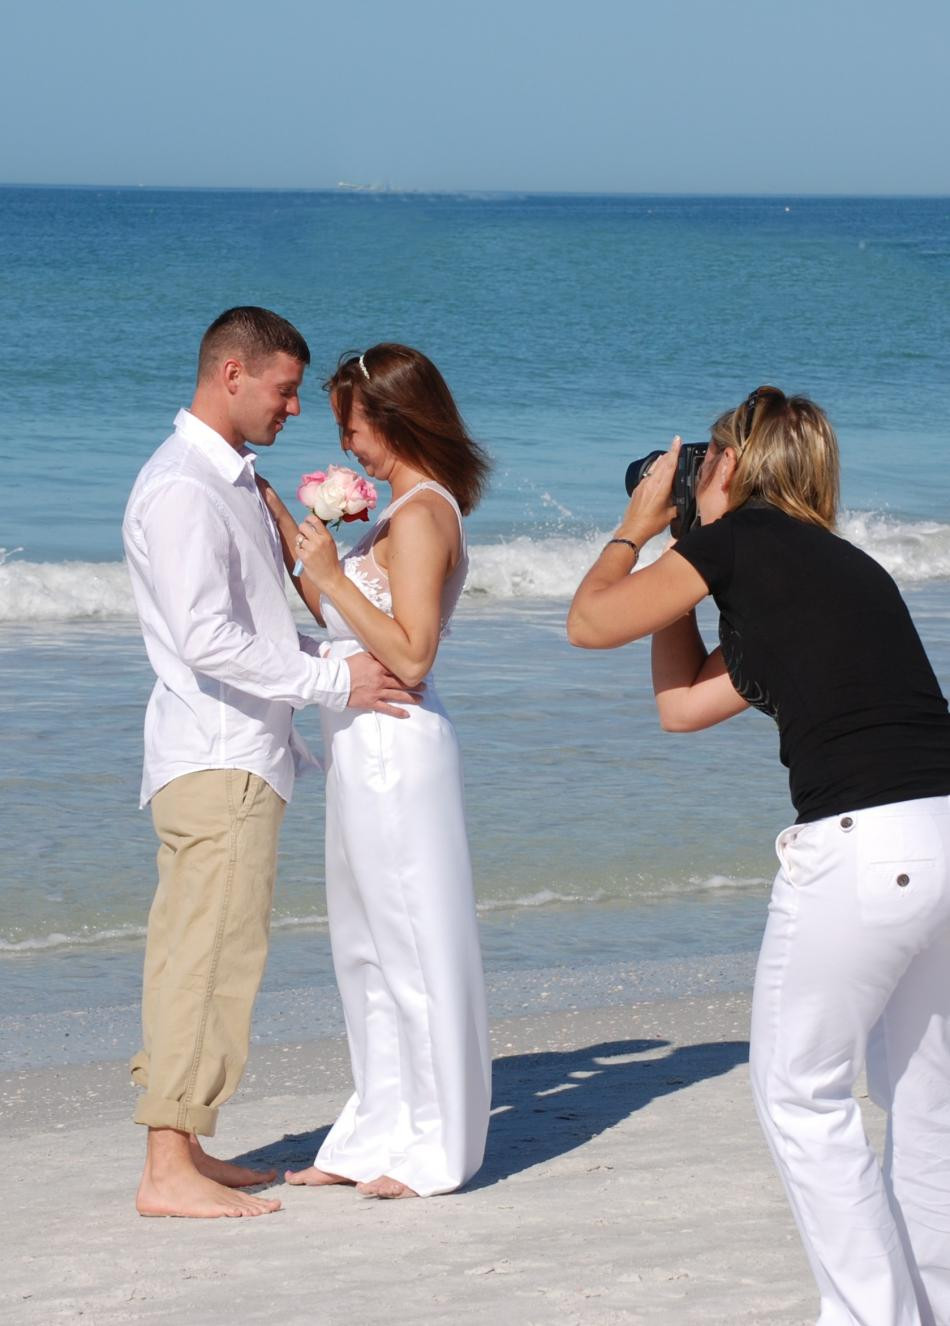 Planning A Beach Wedding
 Top Ten Tips for Planning Your Florida Wedding